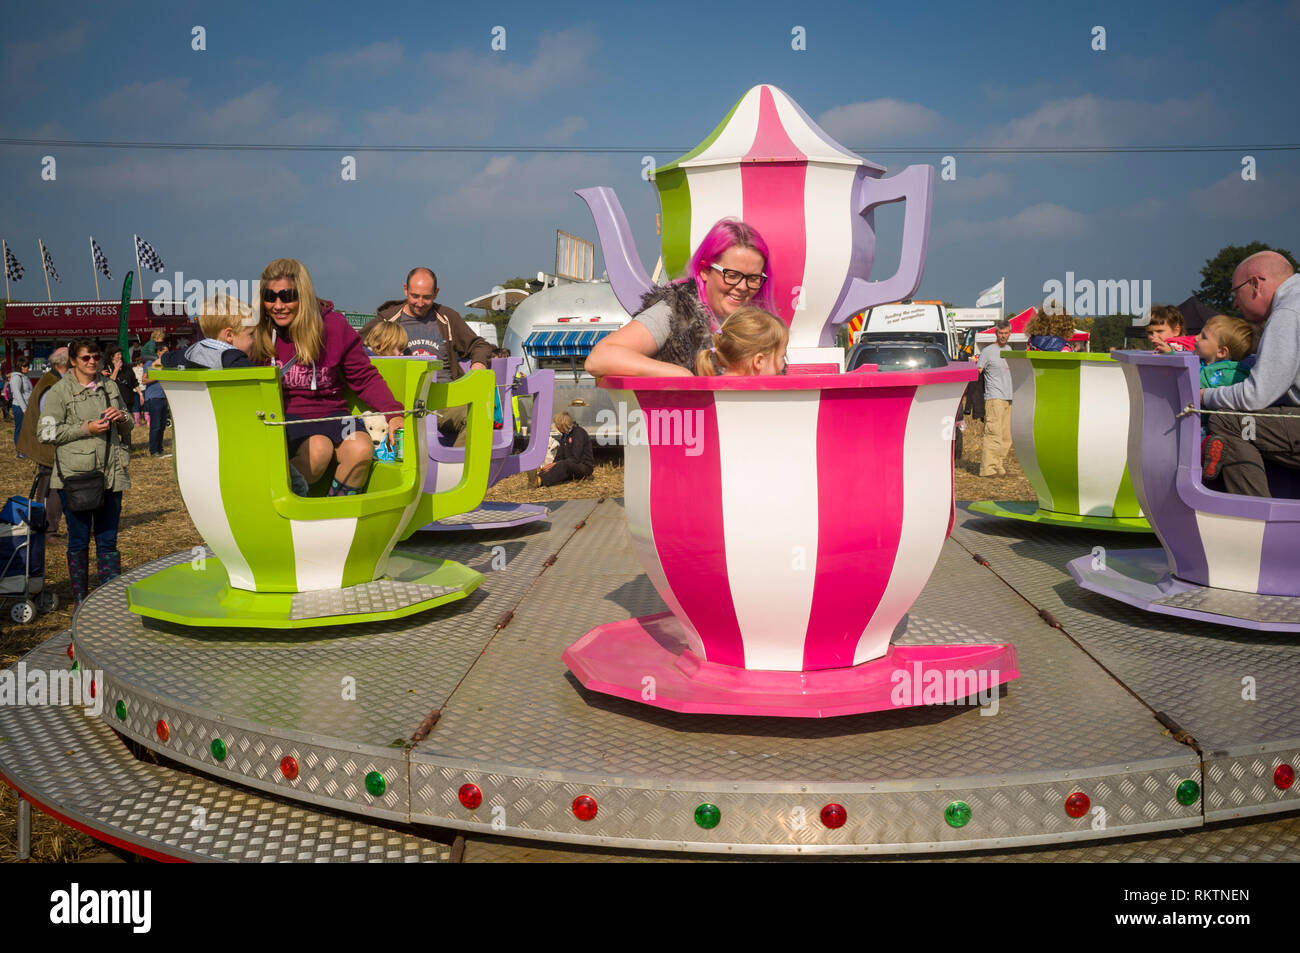 Families enjoying a ride on a teacup fairground roundabout at an agricutural show near Henley-on-Thames, Oxfrdshire. Stock Photo